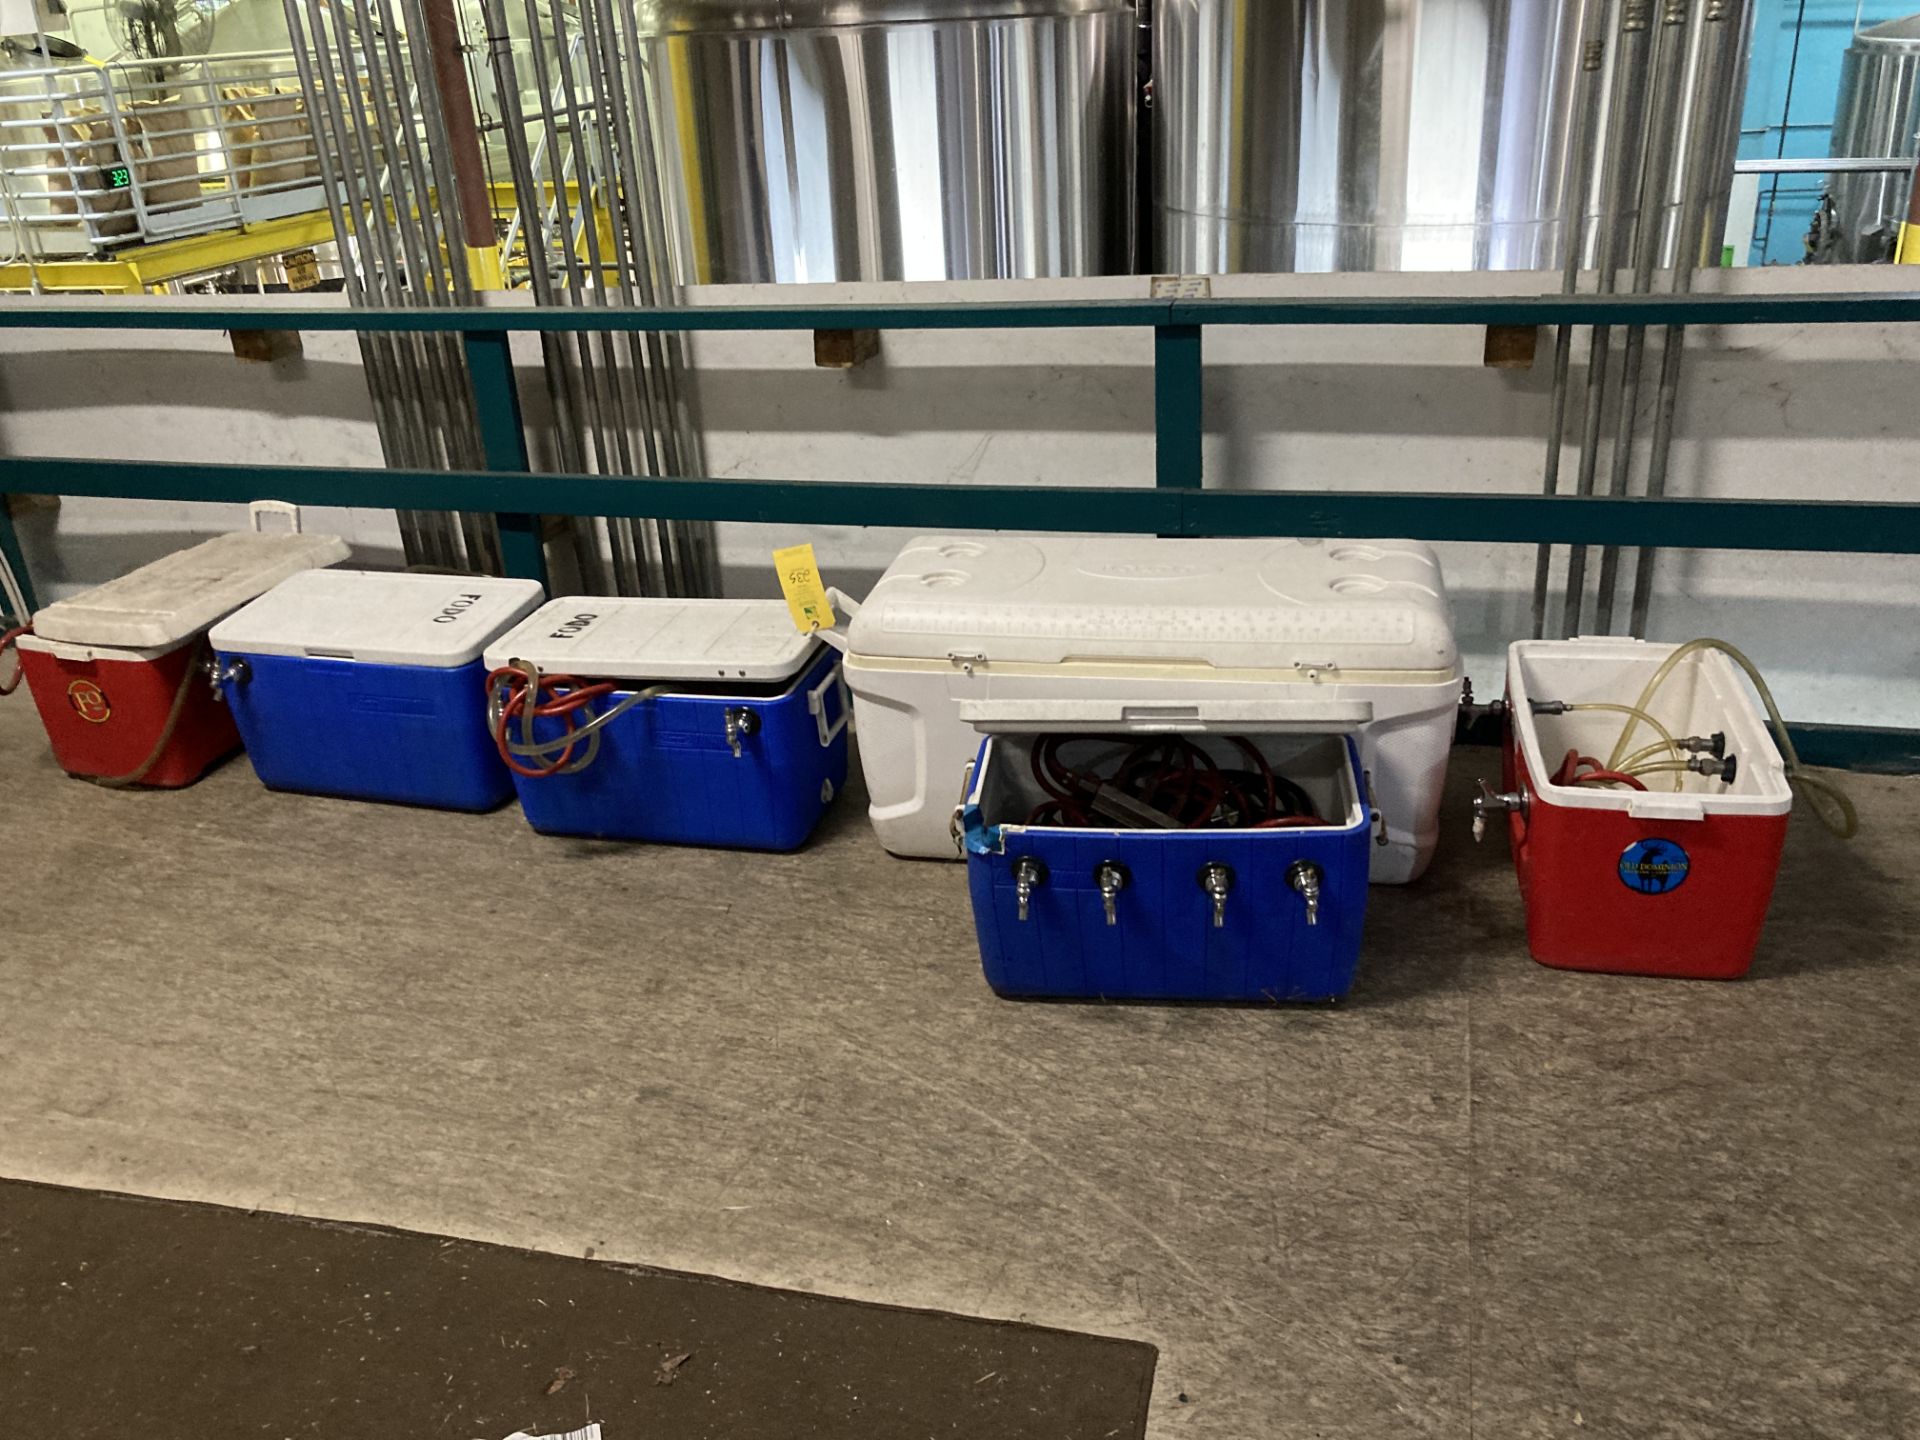 LOT OF 6 coolers, 4 have ice cooling coils and dispensers, ***Rigging and Loading Fee of$: TBD